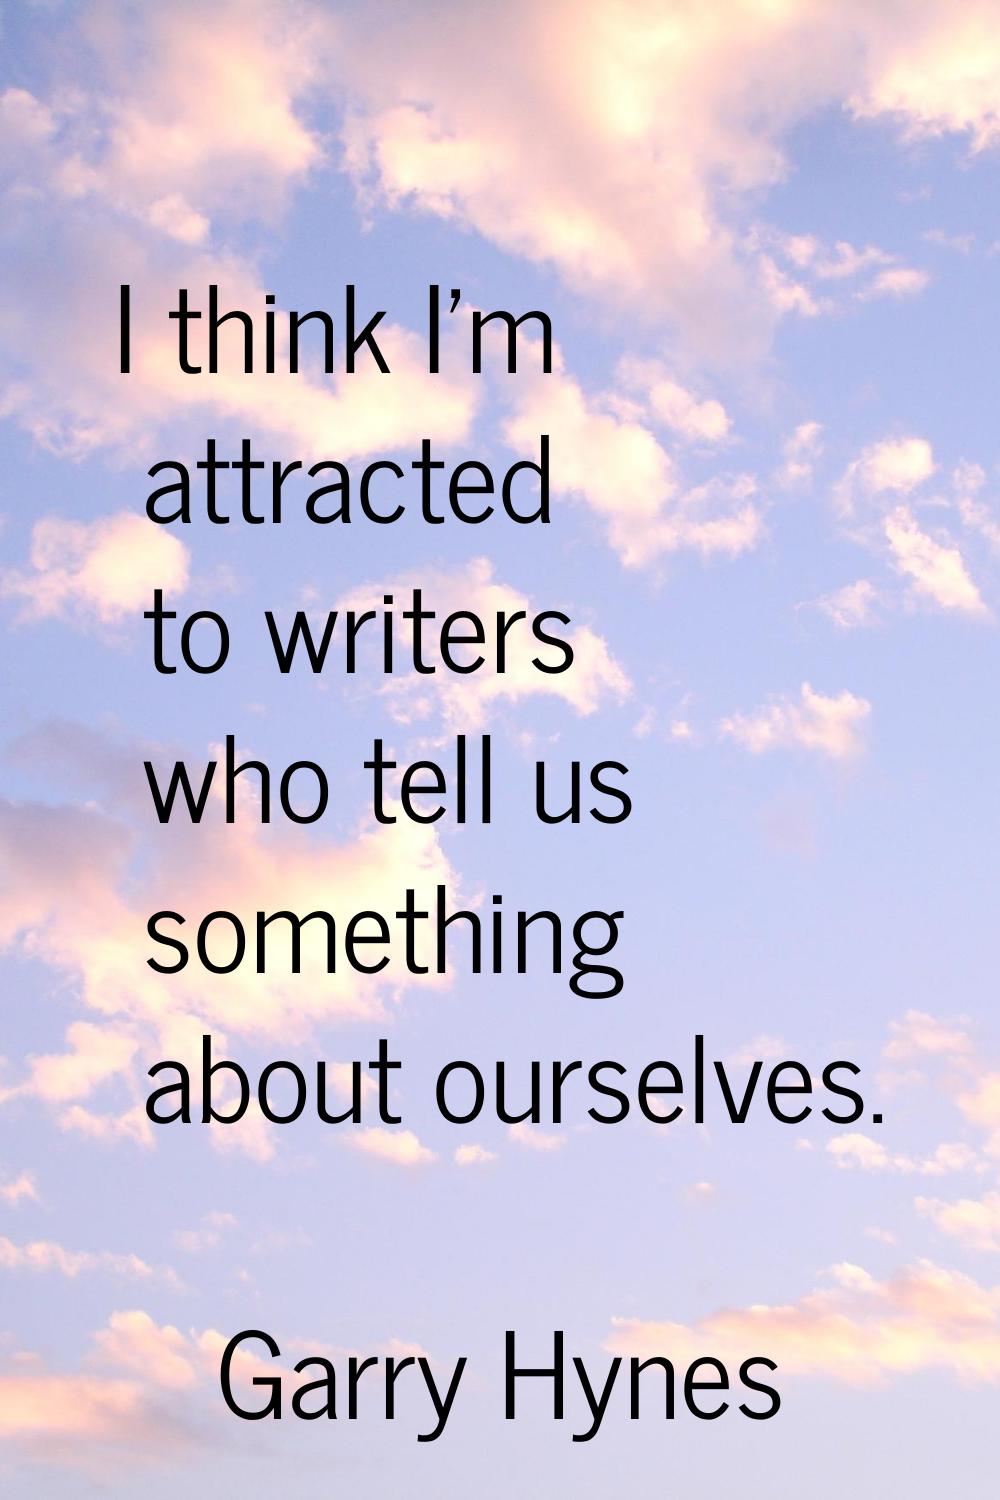 I think I'm attracted to writers who tell us something about ourselves.